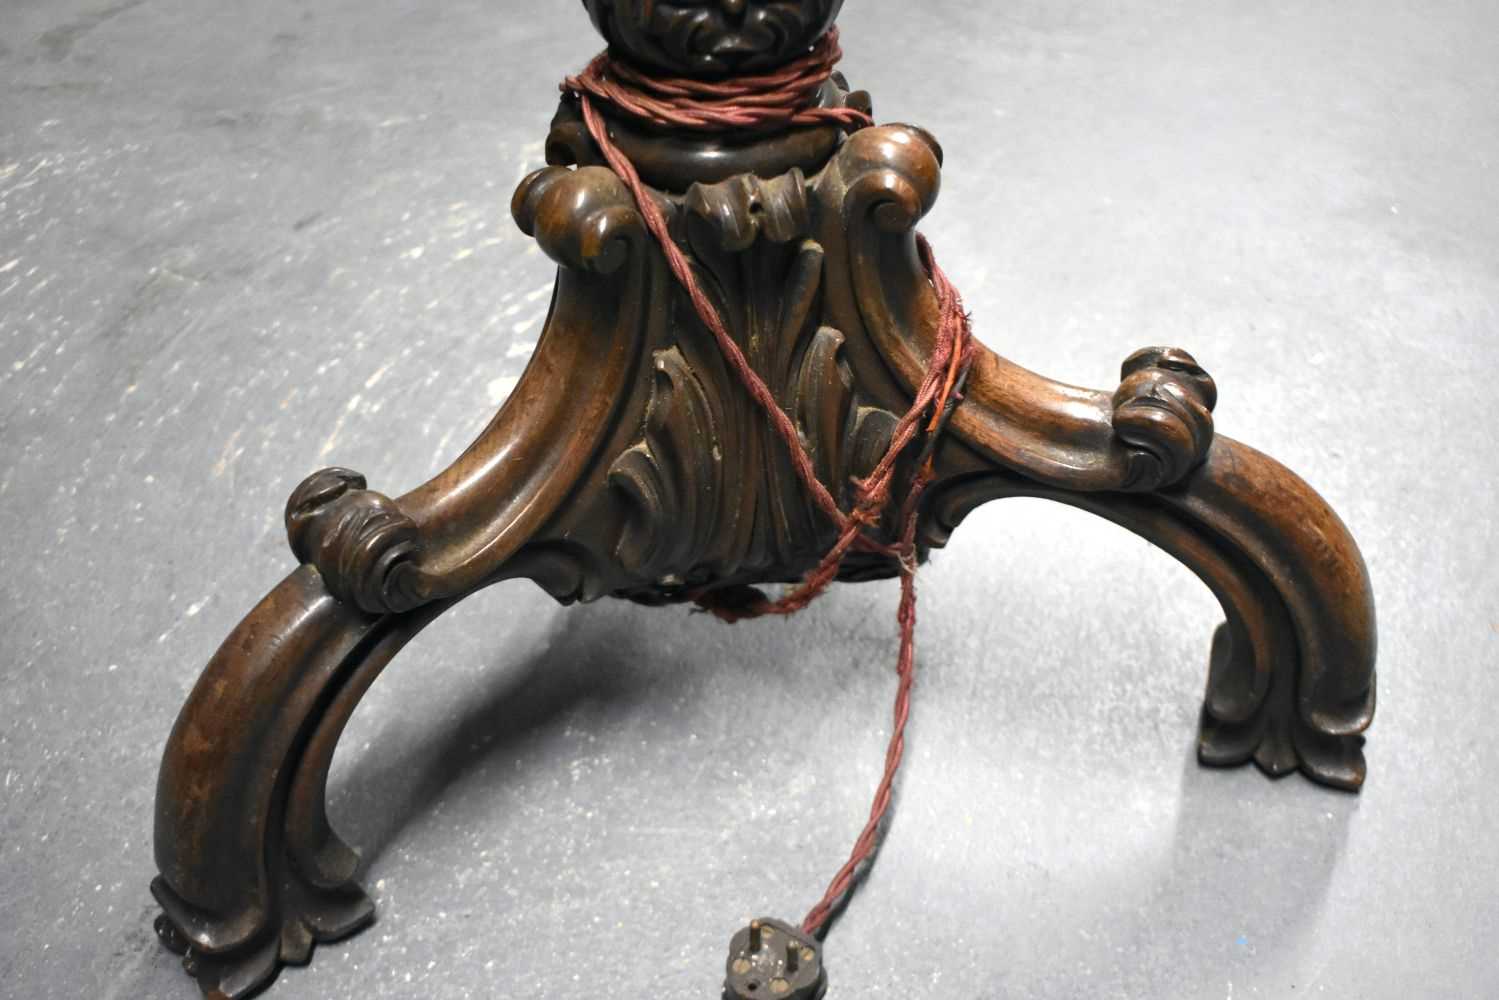 A LARGE VICTORIAN STANDARD LAMP. 190 cm high. - Image 5 of 8